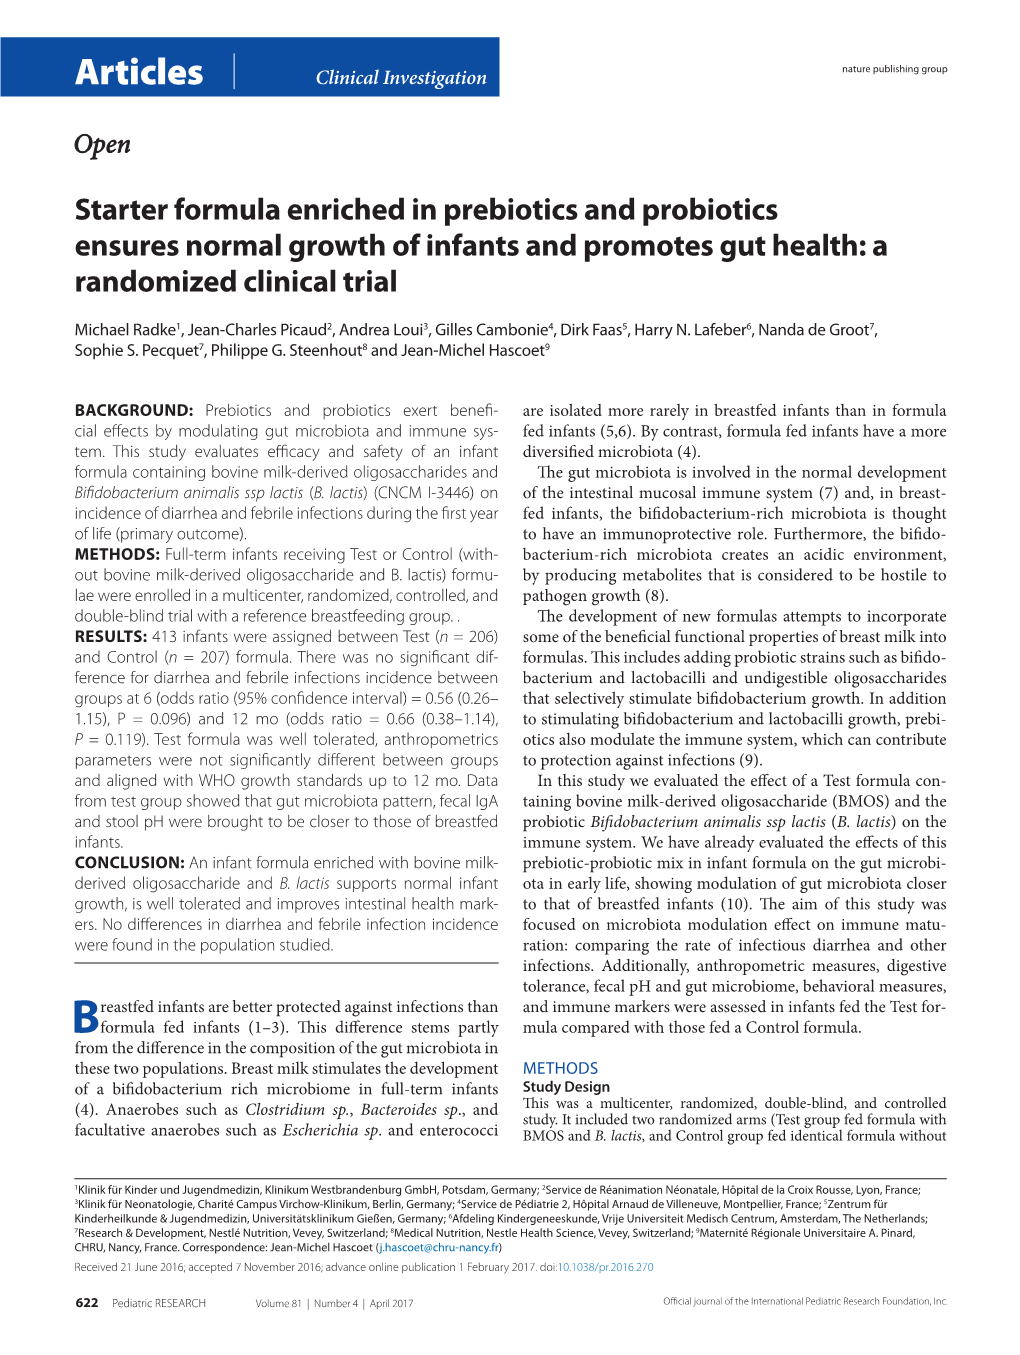 Starter Formula Enriched in Prebiotics and Probiotics Ensures Normal Growth of Infants and Promotes Gut Health: a Randomized Clinical Trial